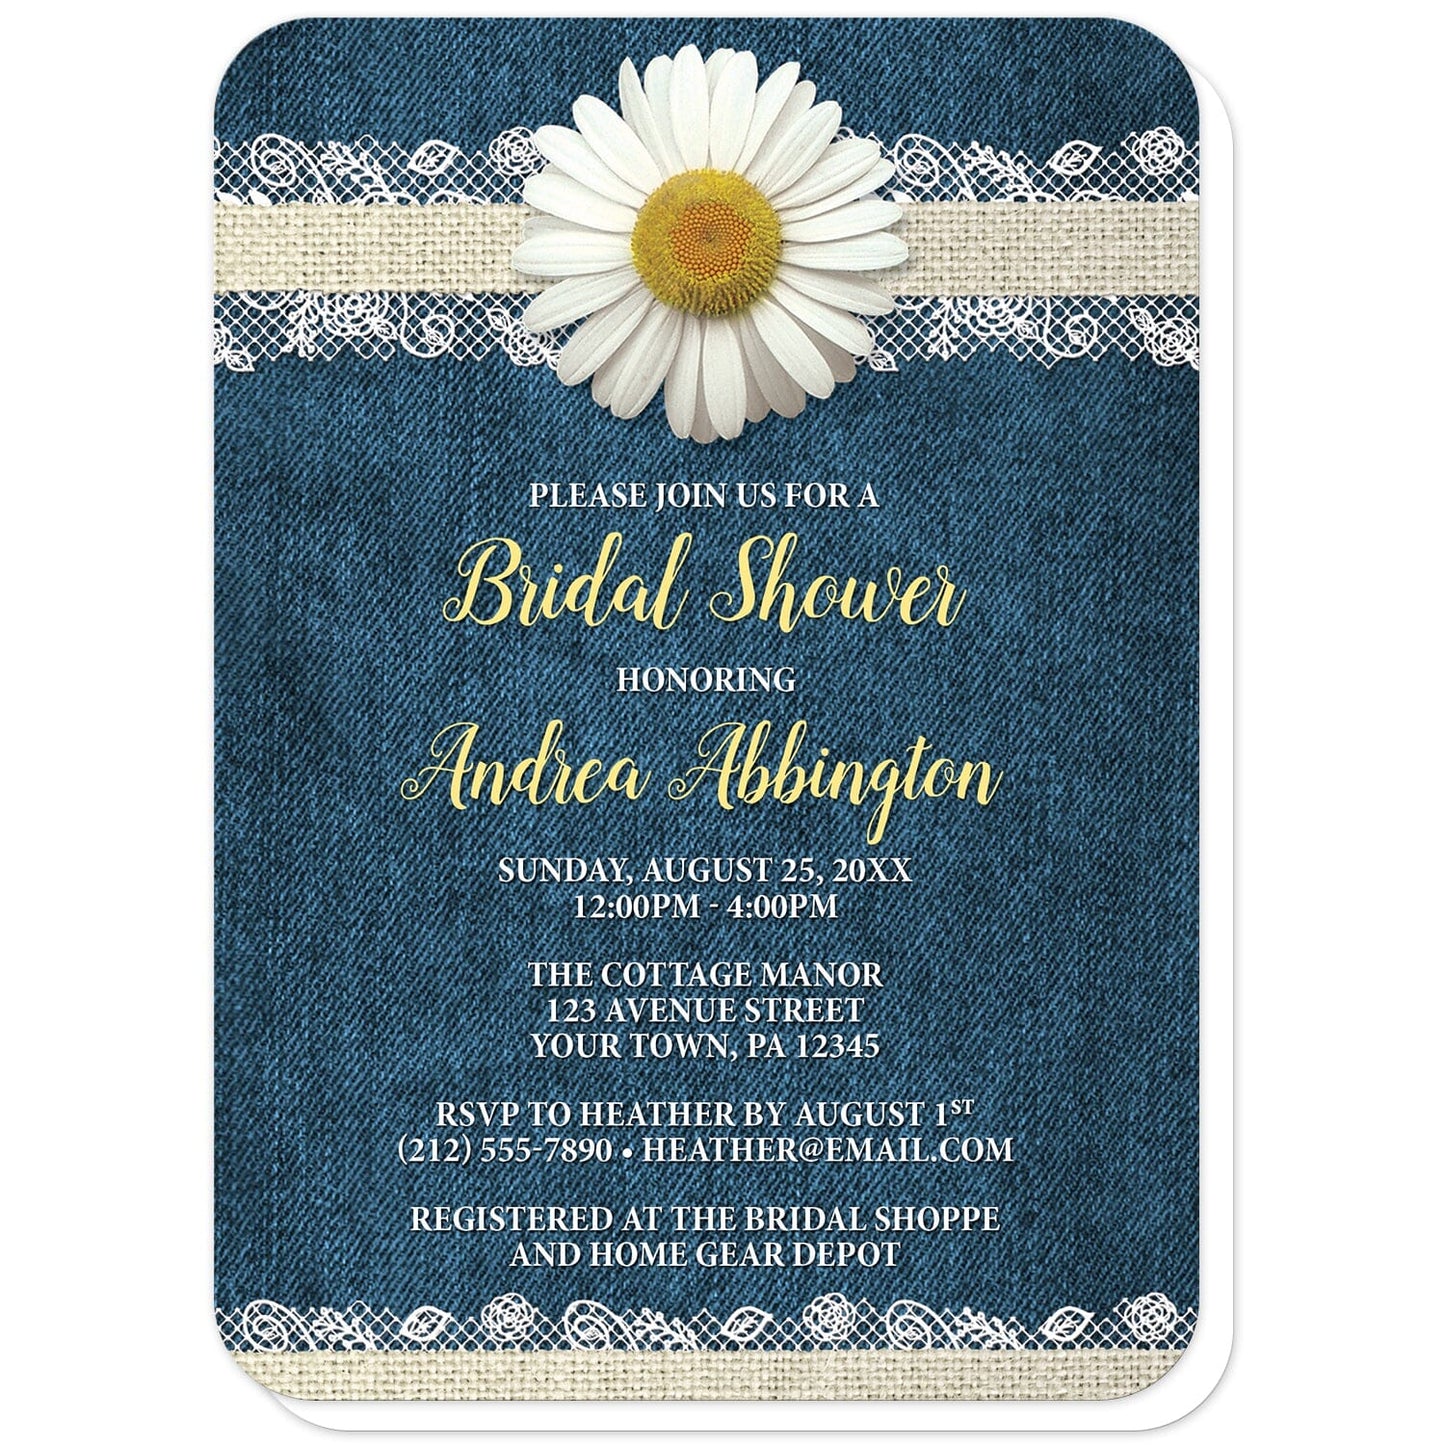 Daisy Burlap and Lace Denim Bridal Shower Invitations (with rounded corners) at Artistically Invited. Southern rustic daisy burlap and lace denim bridal shower invitations with a white daisy flower centered at the top on a burlap and lace ribbon strip illustration, over a country blue denim background. Your personalized bridal shower celebration details are custom printed in yellow and white over the denim design.